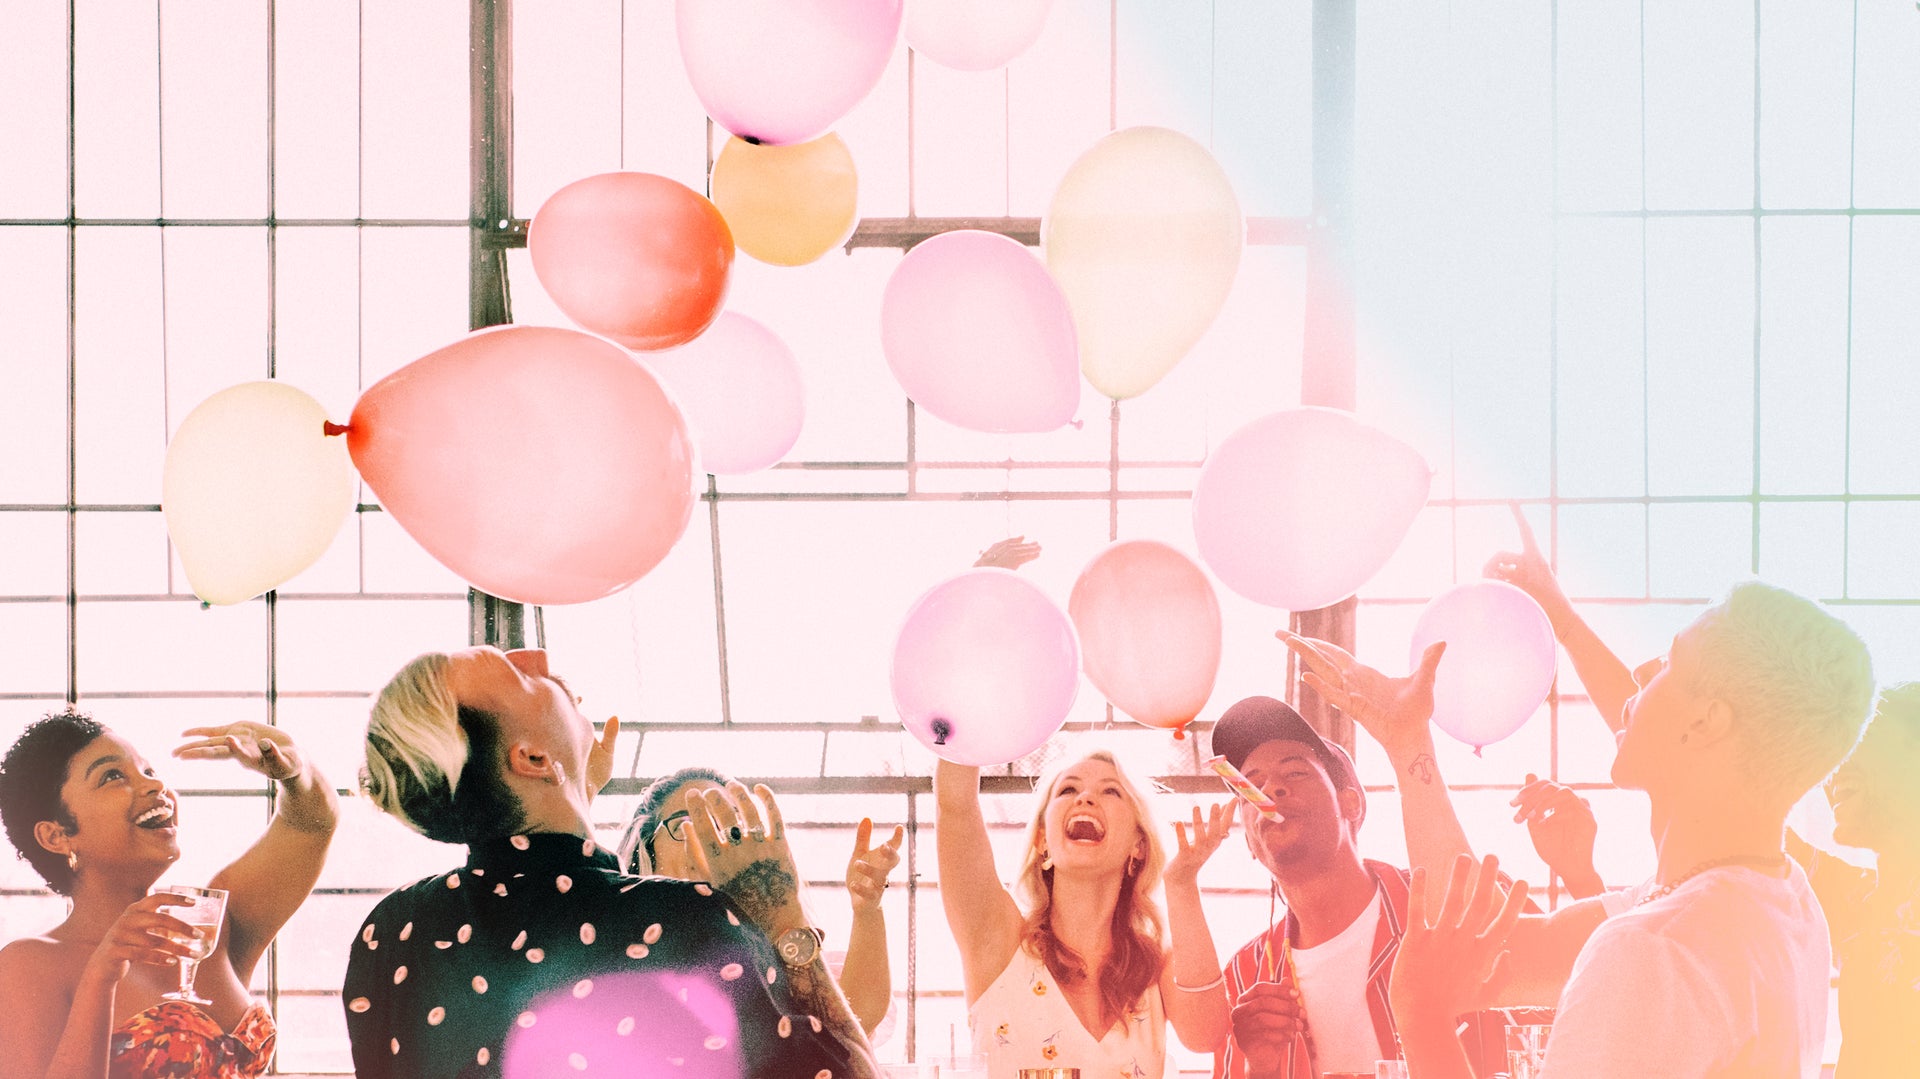 10 Pro Tips for Throwing the Best Party Ever